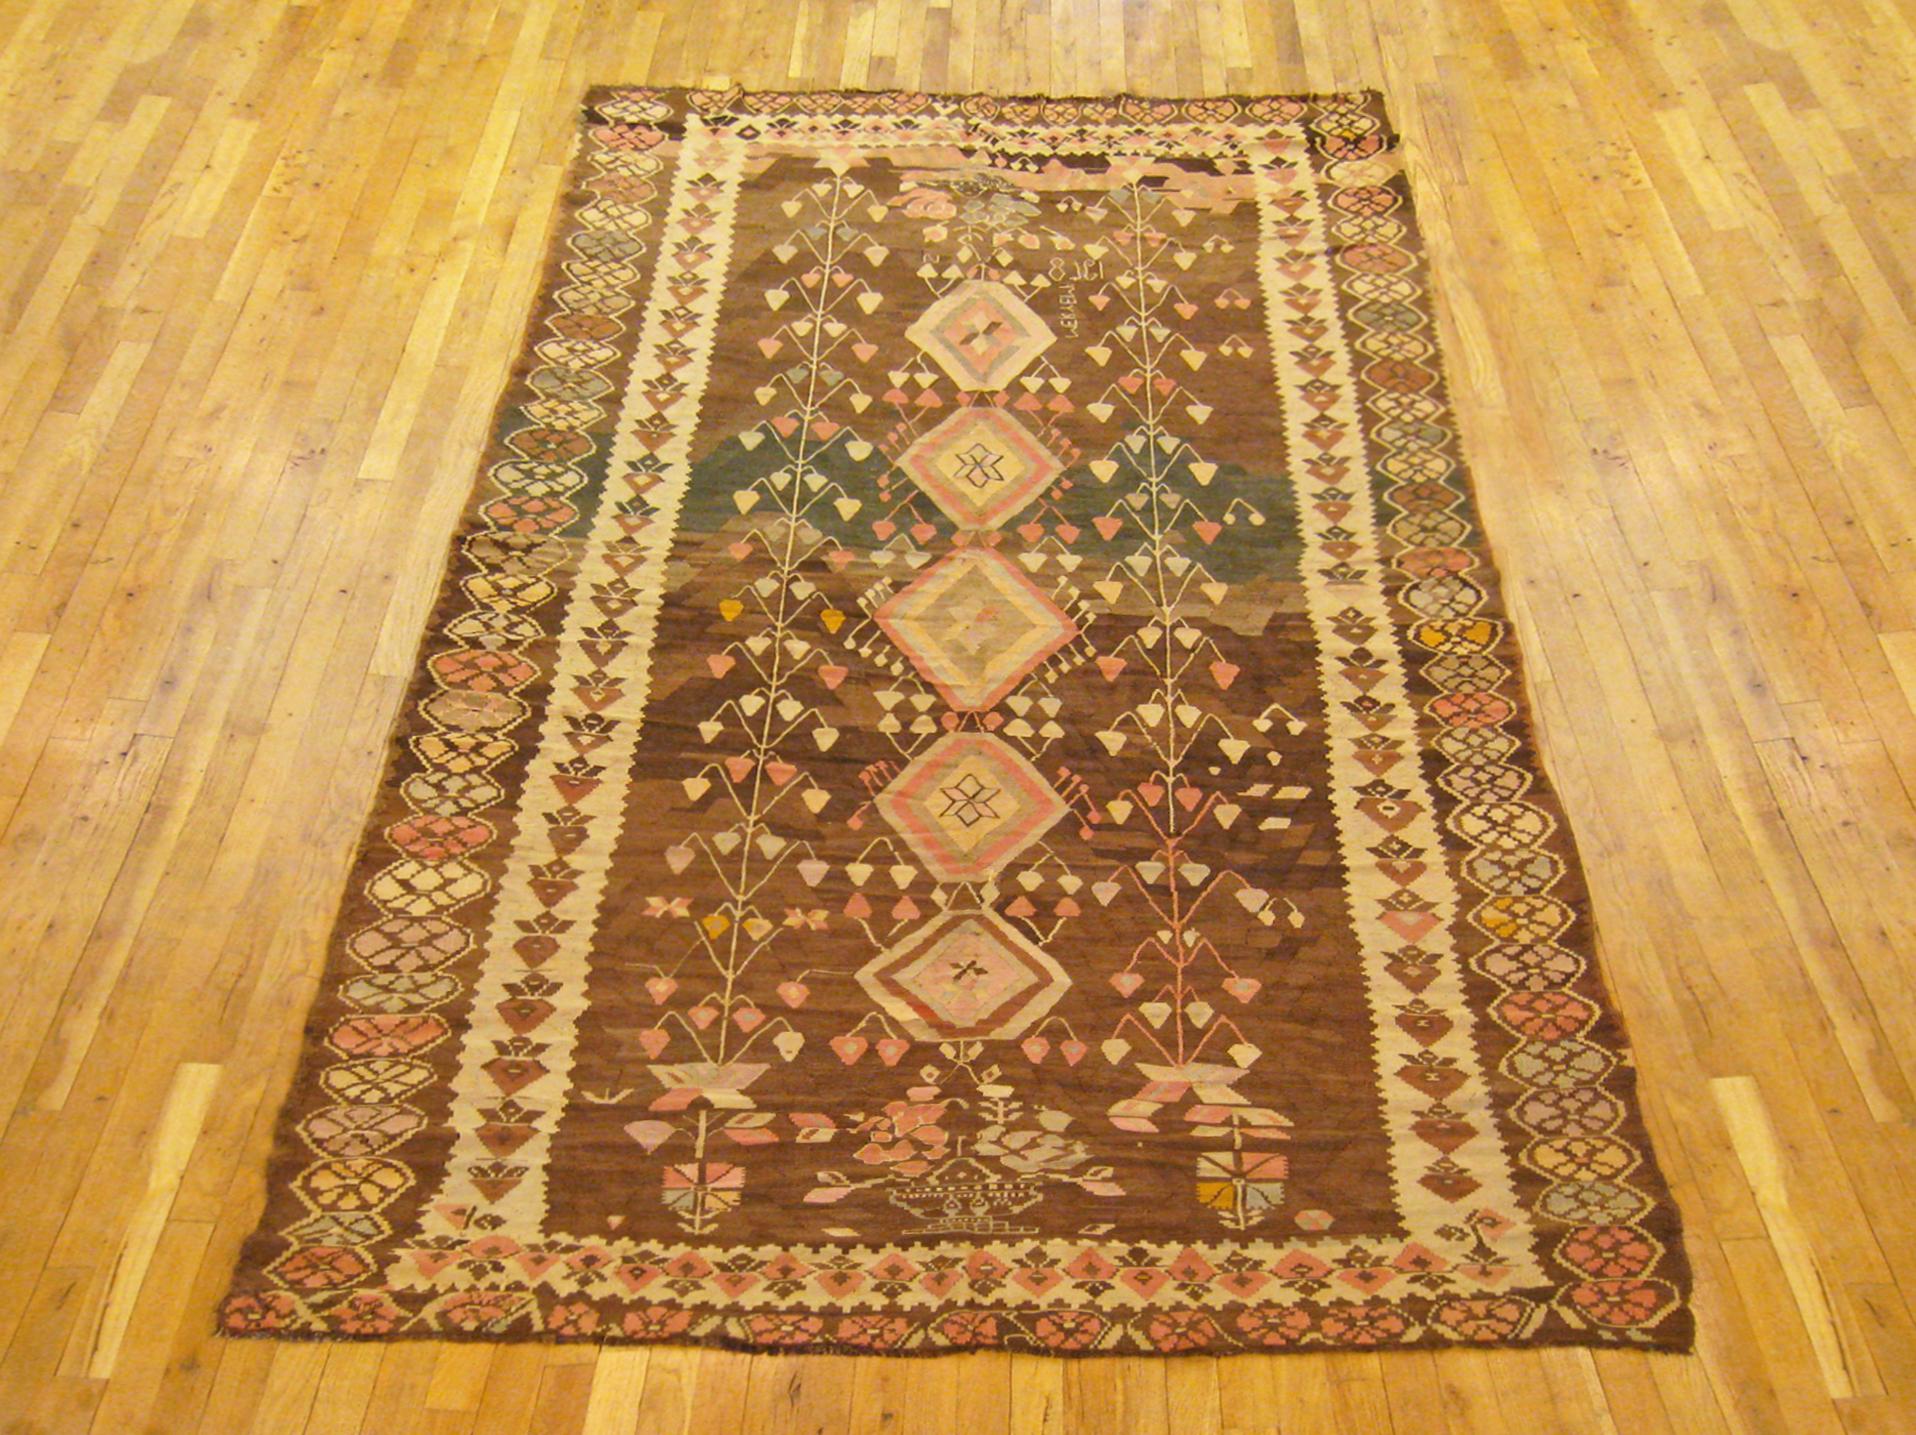 A vintage Bessarabian Kilim oriental rug in kaleghi (gallery) size, size 11'3 x 5'6, circa 1930. This handsome handmade flat-woven carpet has no upward pile, and features a series of diamond designs at center, flanked by stylized tree motifs in the